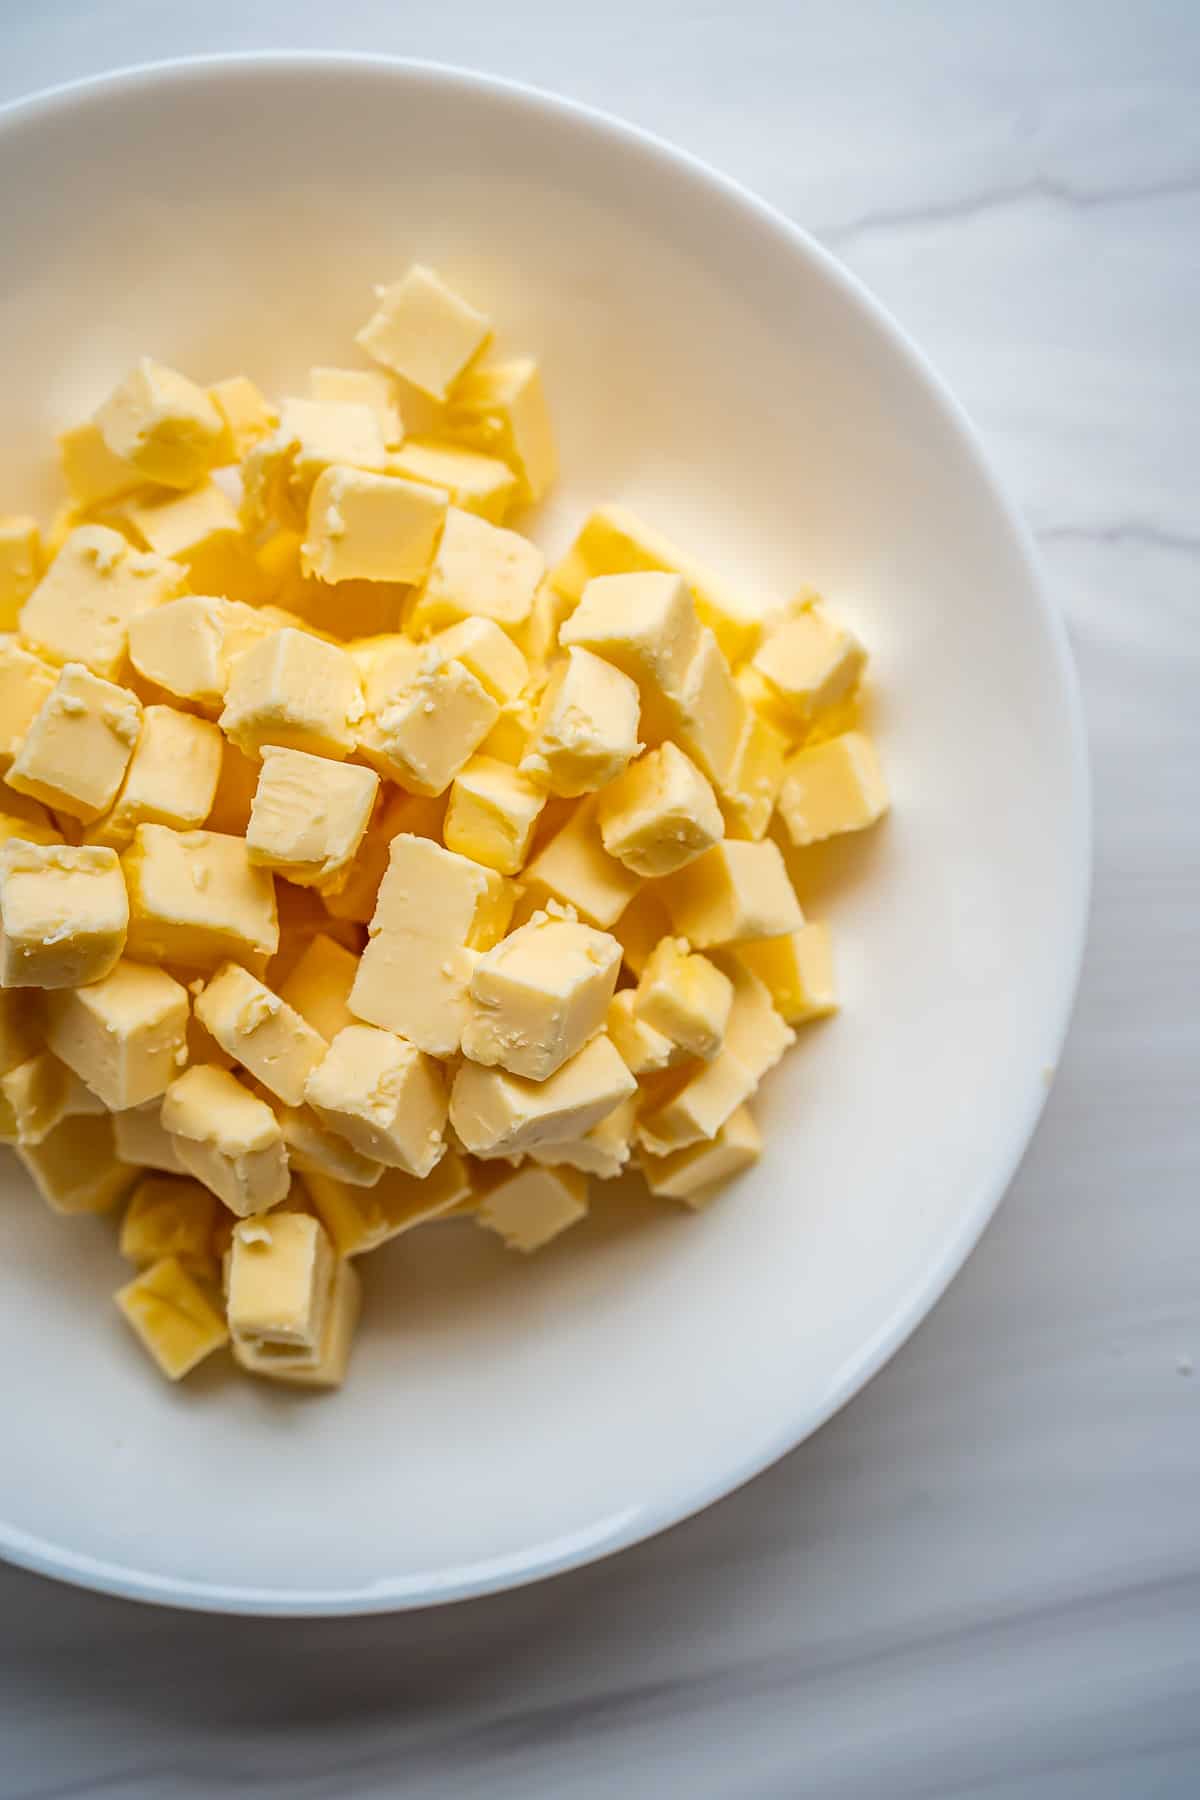 A bowl of cold cubed butter.